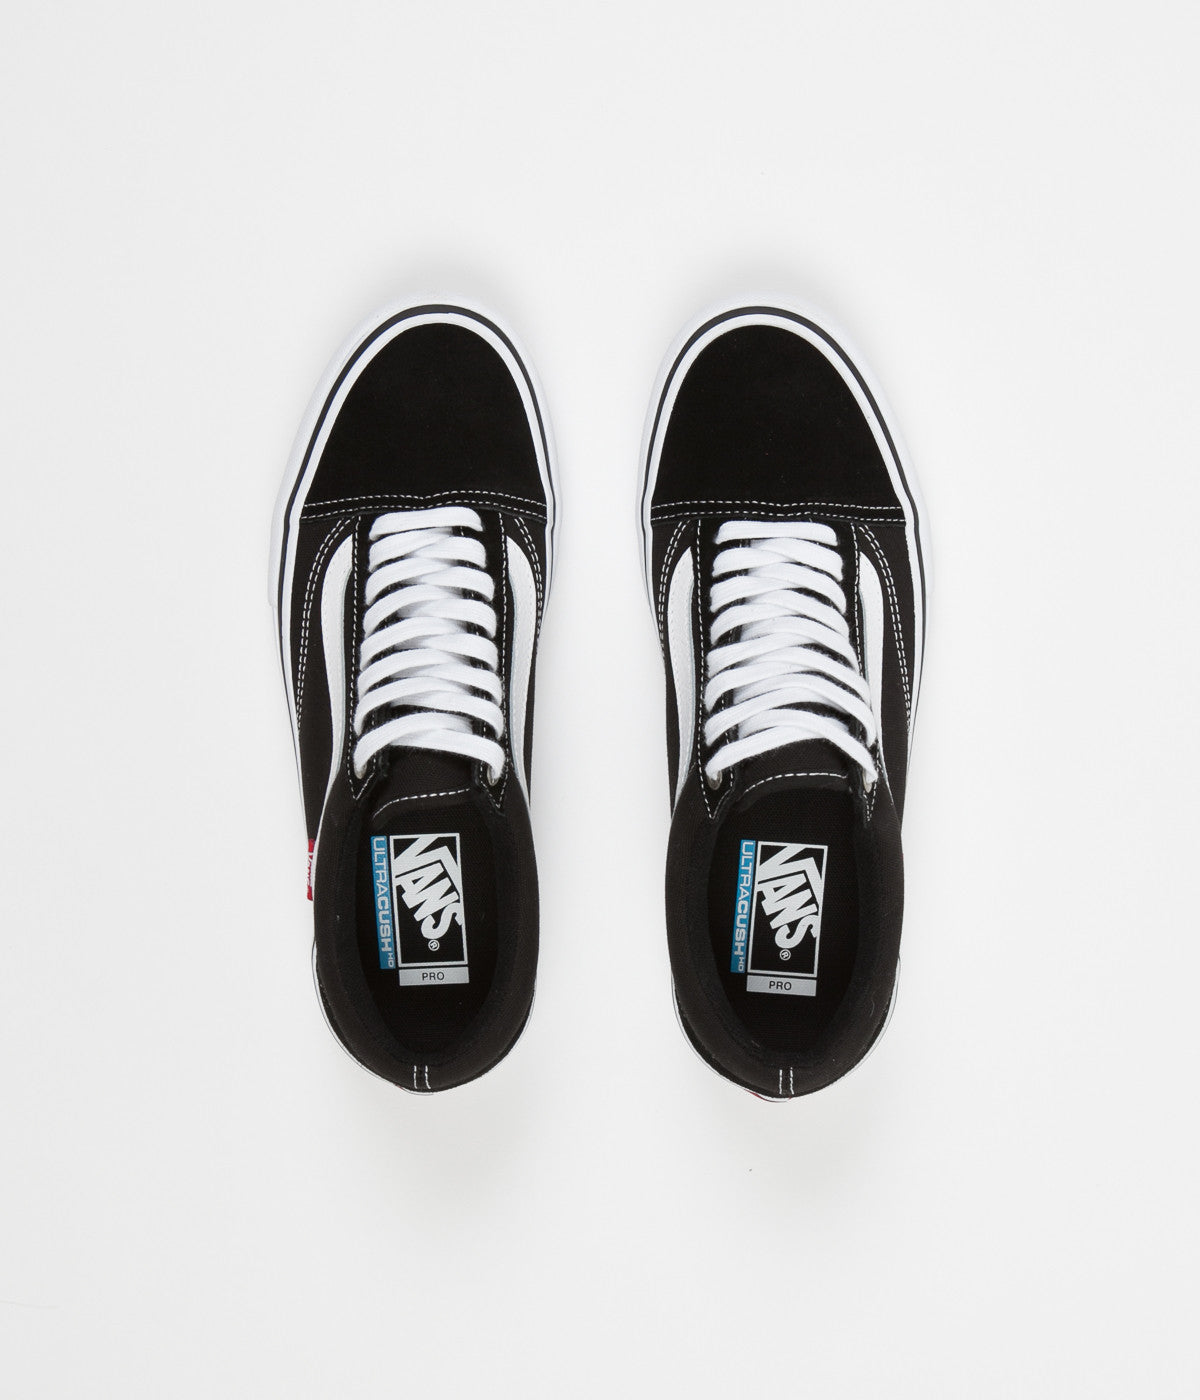 Get - vans without white stitching 